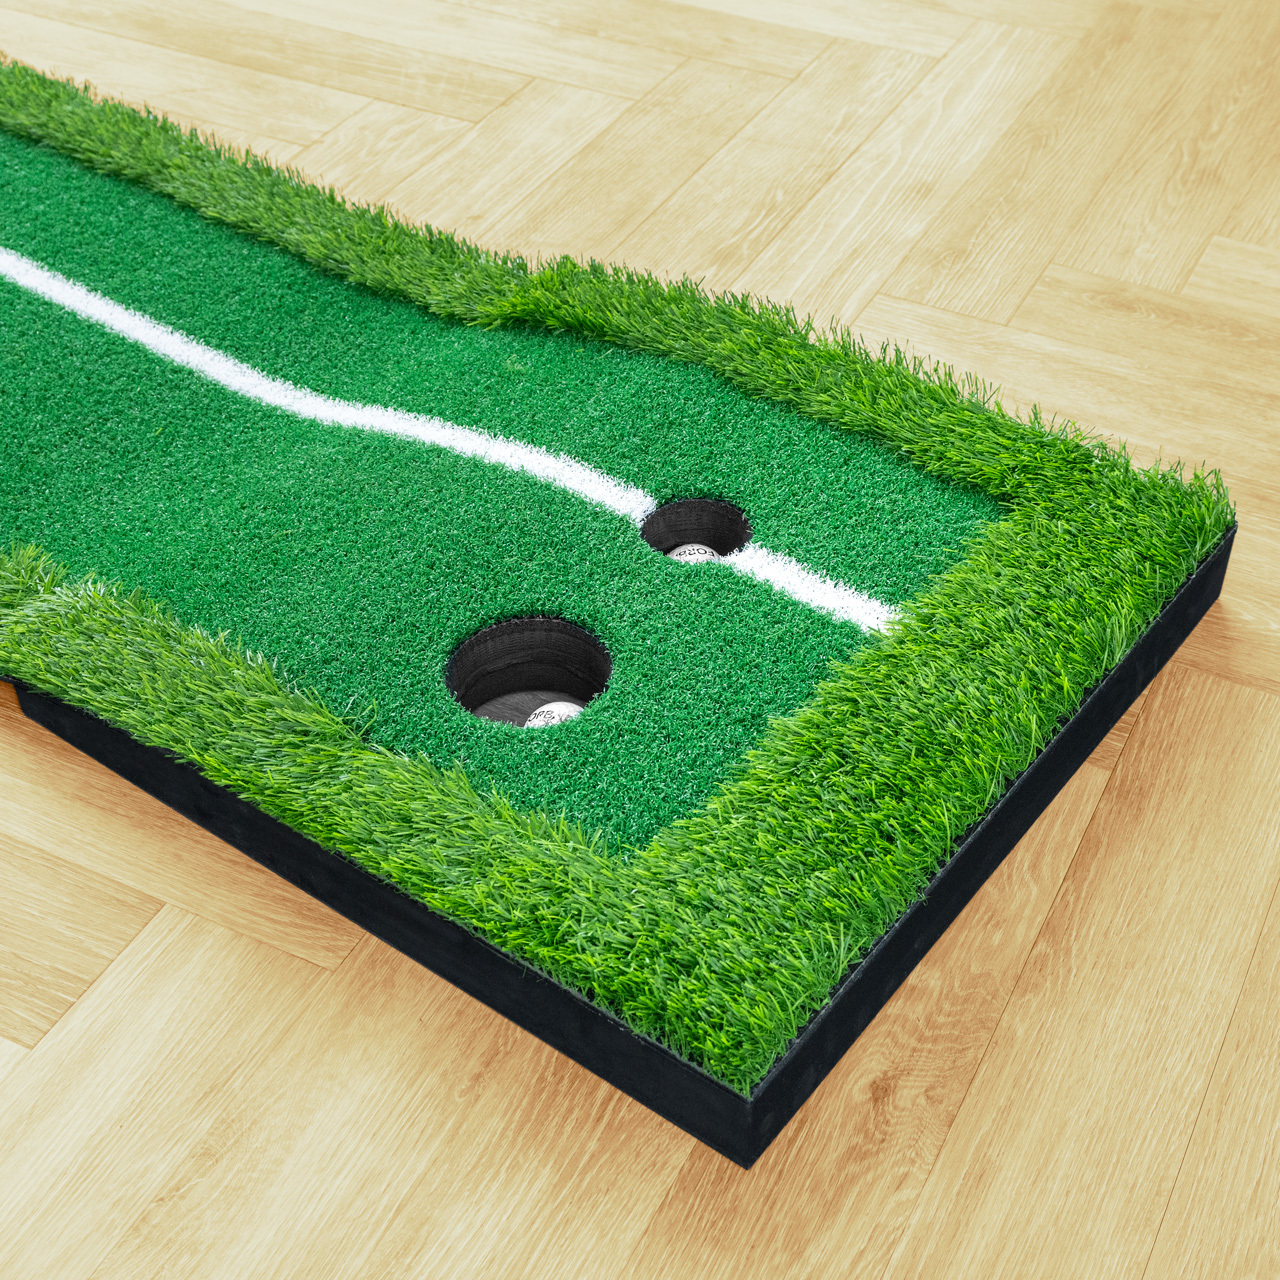 FORB Golf Putting Alignment Mat